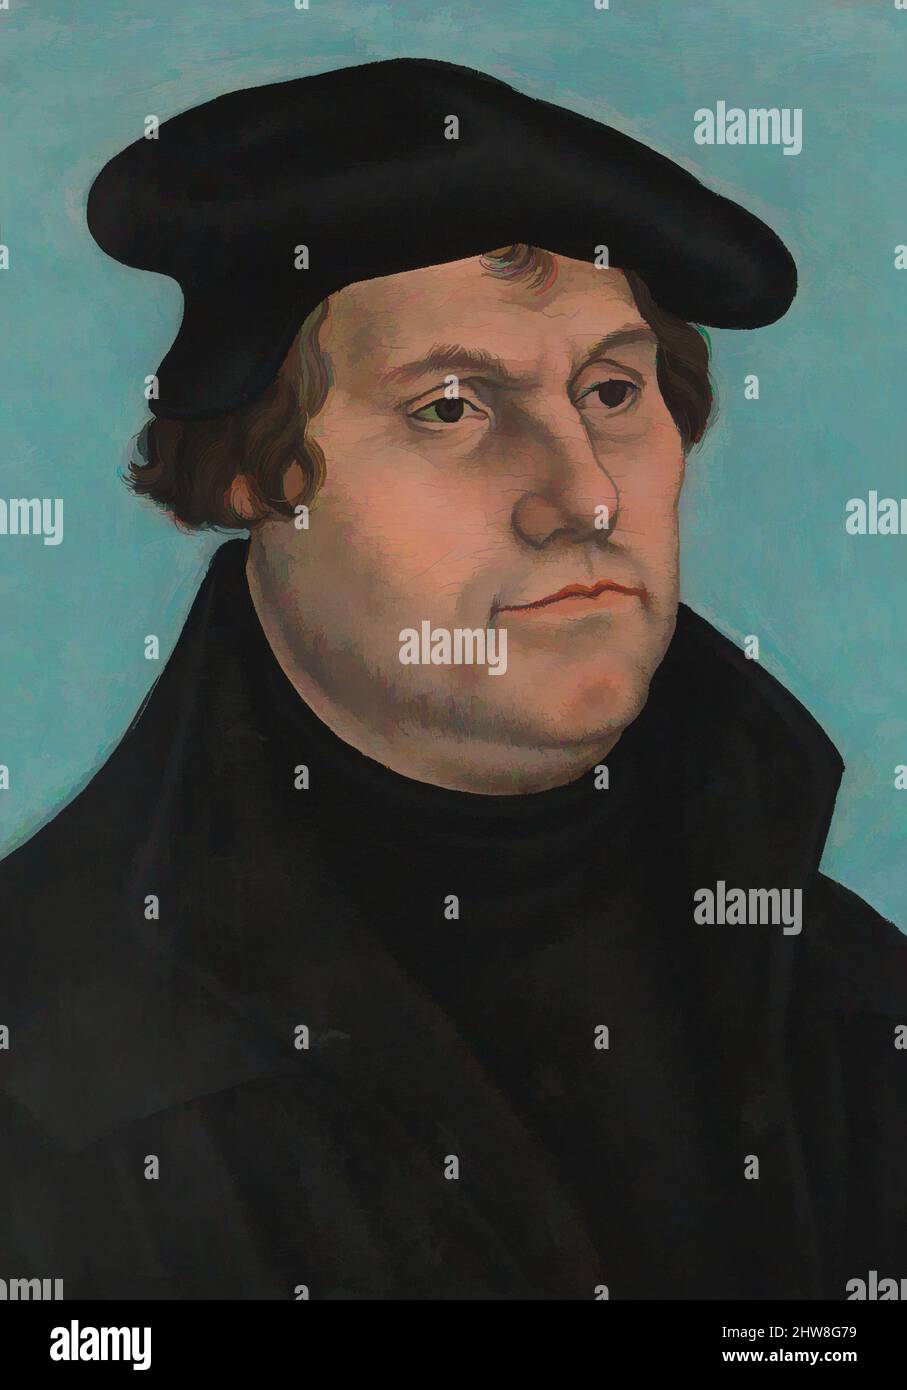 Art inspired by Martin Luther (1483–1546), probably 1532, Oil on wood, 13 1/8 x 9 1/8 in. (33.3 x 23.2 cm), Paintings, Workshop of Lucas Cranach the Elder (German, Kronach 1472–1553 Weimar), Lucas Cranach and his workshop produced many printed and painted portraits of Martin Luther, Classic works modernized by Artotop with a splash of modernity. Shapes, color and value, eye-catching visual impact on art. Emotions through freedom of artworks in a contemporary way. A timeless message pursuing a wildly creative new direction. Artists turning to the digital medium and creating the Artotop NFT Stock Photo